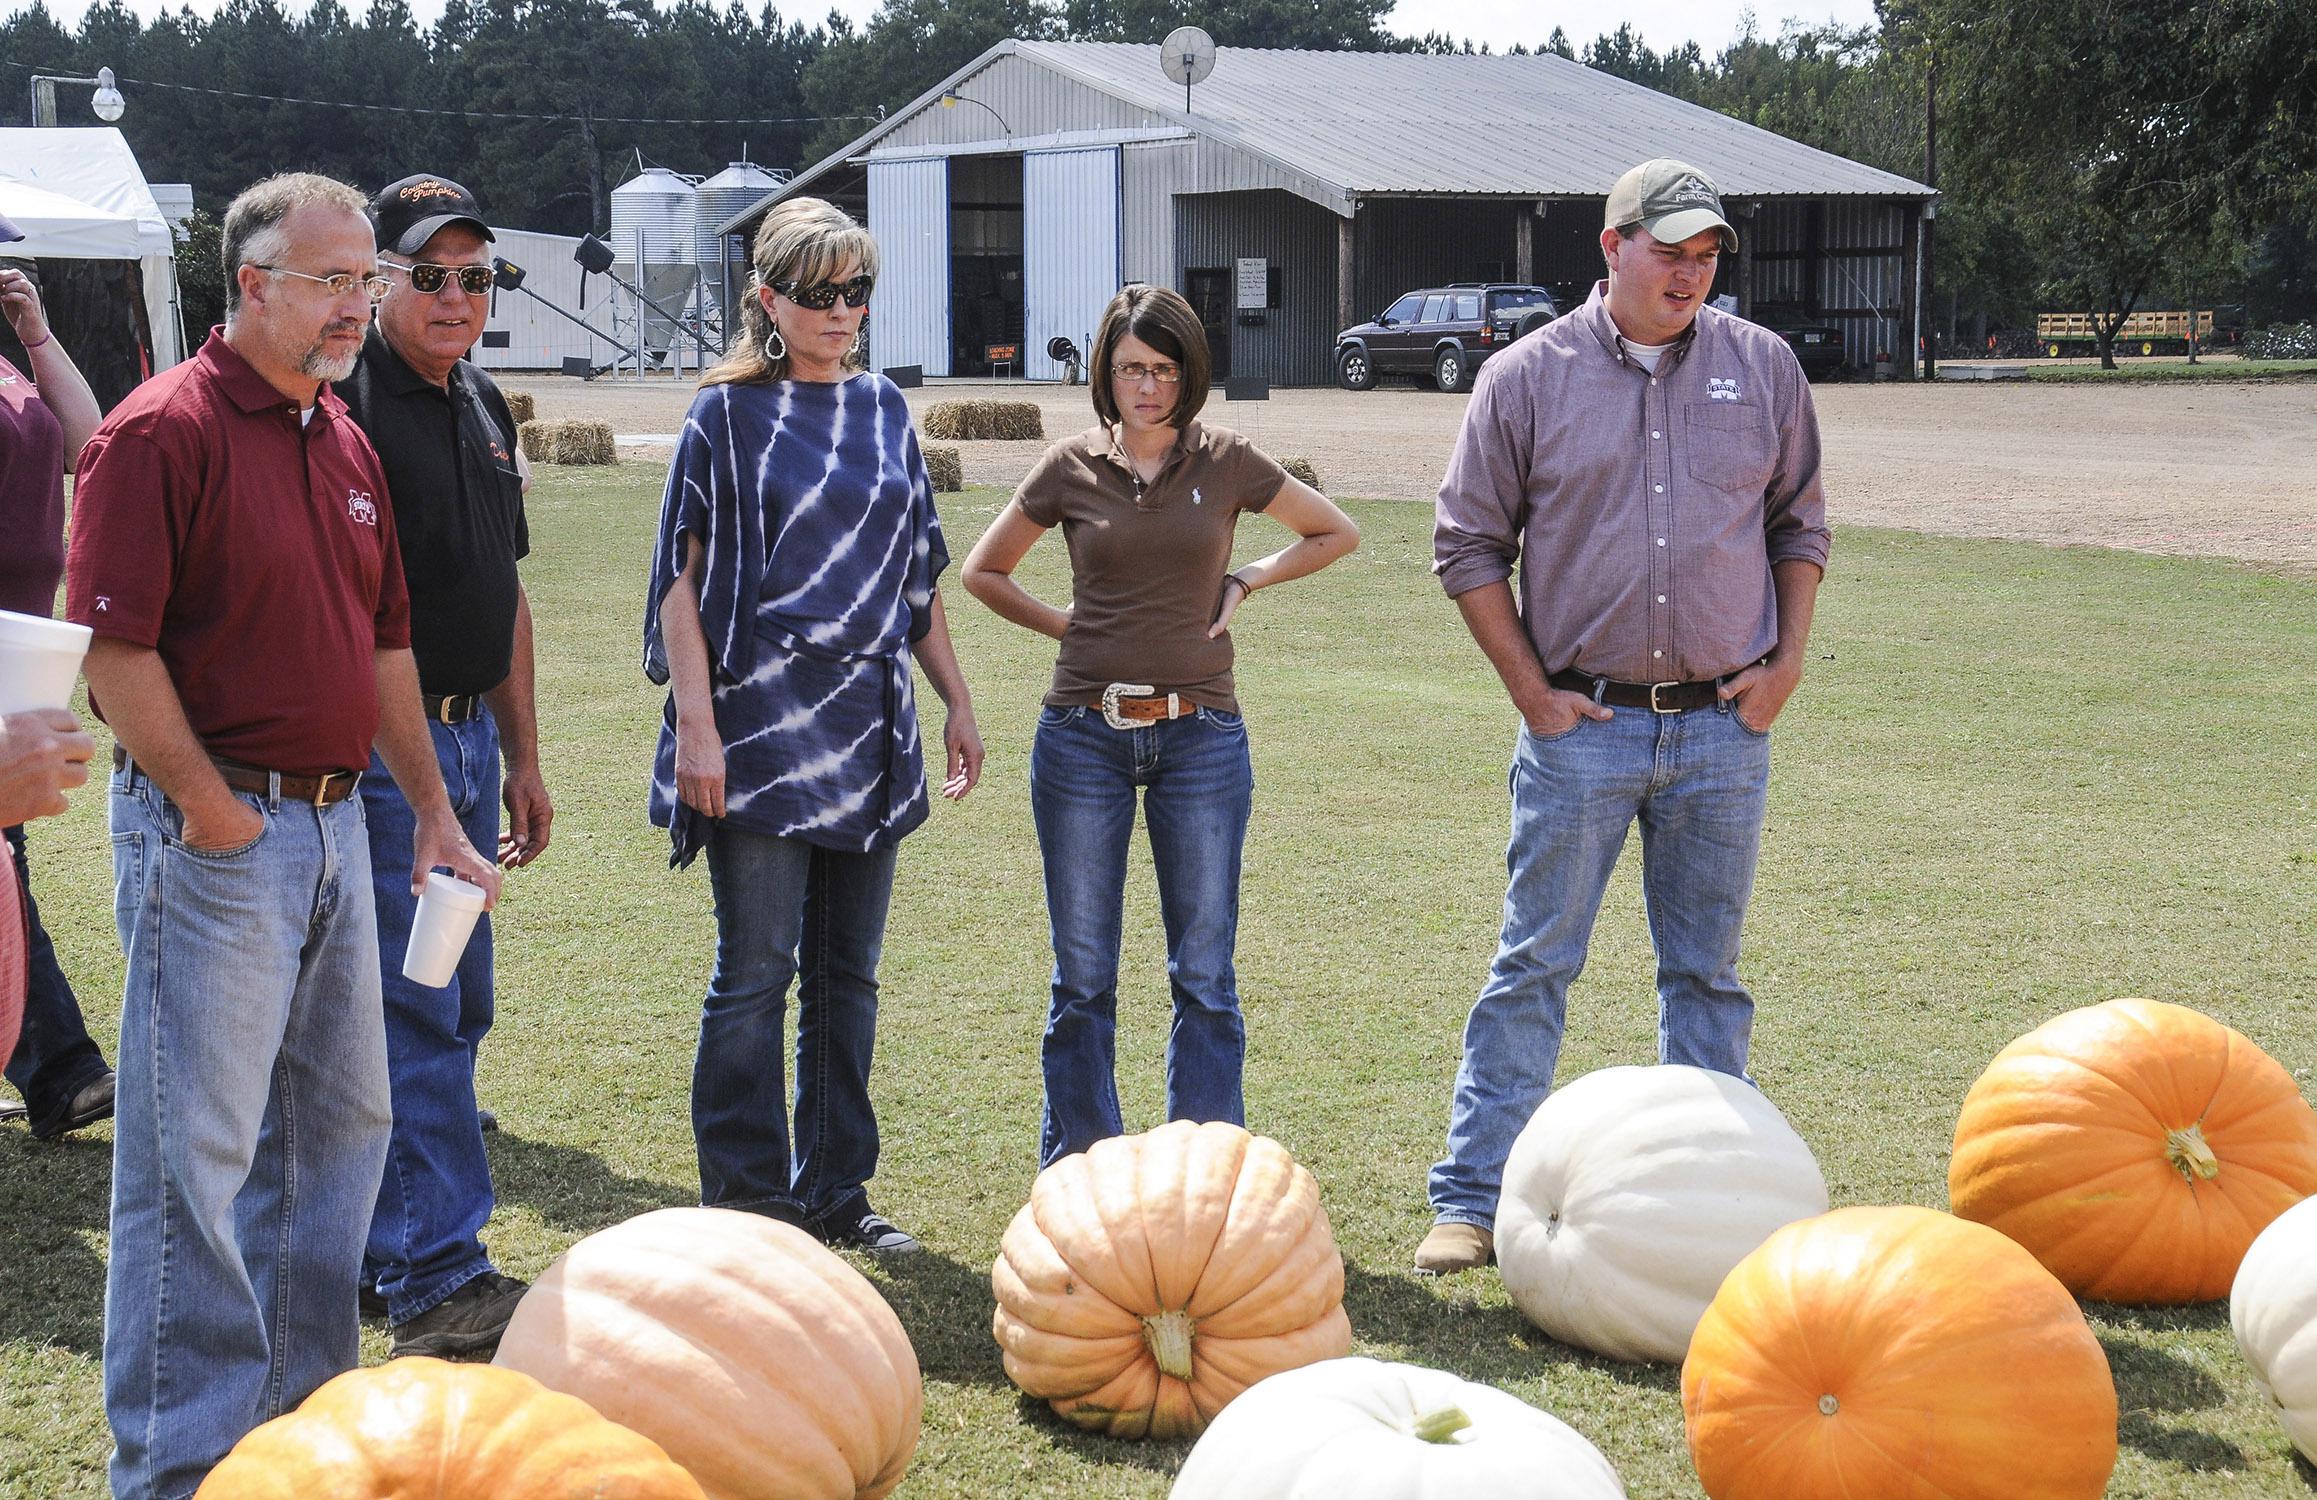 Extension agricultural agents review pumpkins recently harvested at County Pumpkins in Lowndes County. The fall tour participants include, from left, Jeff Wilson of Lowndes County, farm owner Dwight Colson of Caledonia, Kimberly Wilborn of Lamar County, Julie White of Oktibbeha County and Reid Nevins of Lowndes County. (Photo by MSU Ag Communications/Scott Corey)